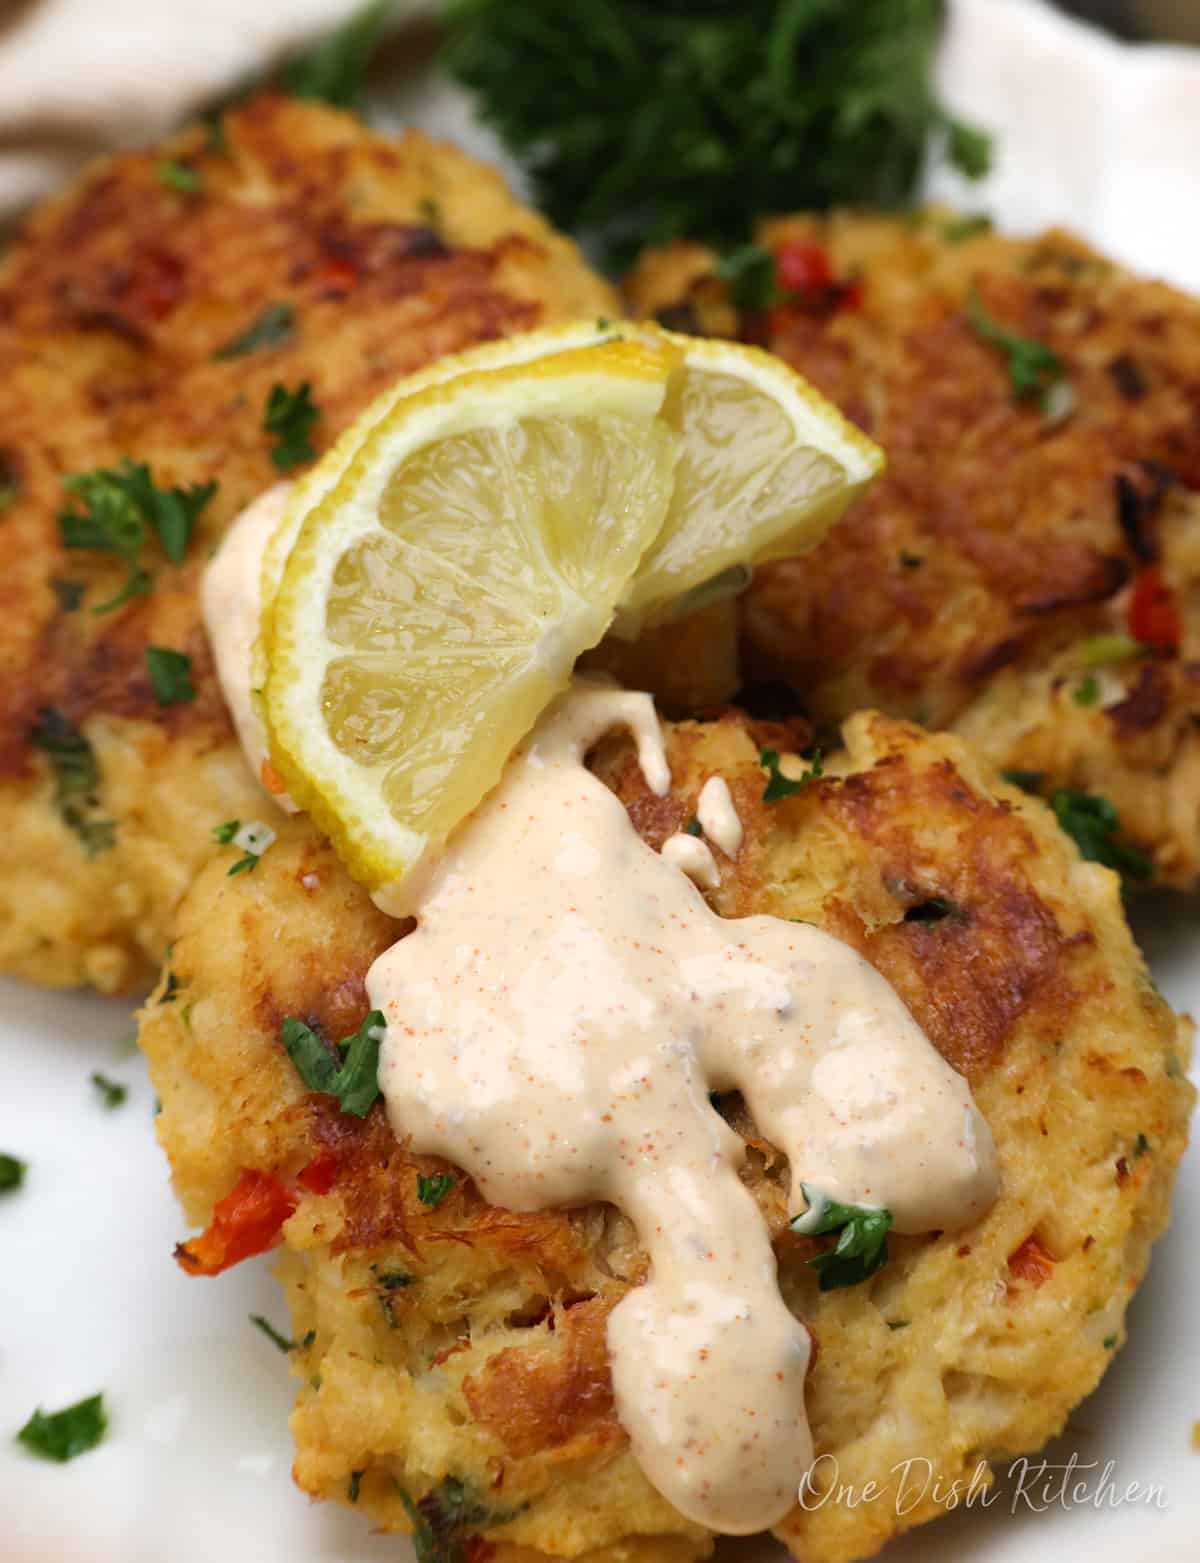 a crab cake topped with remoulade sauce.